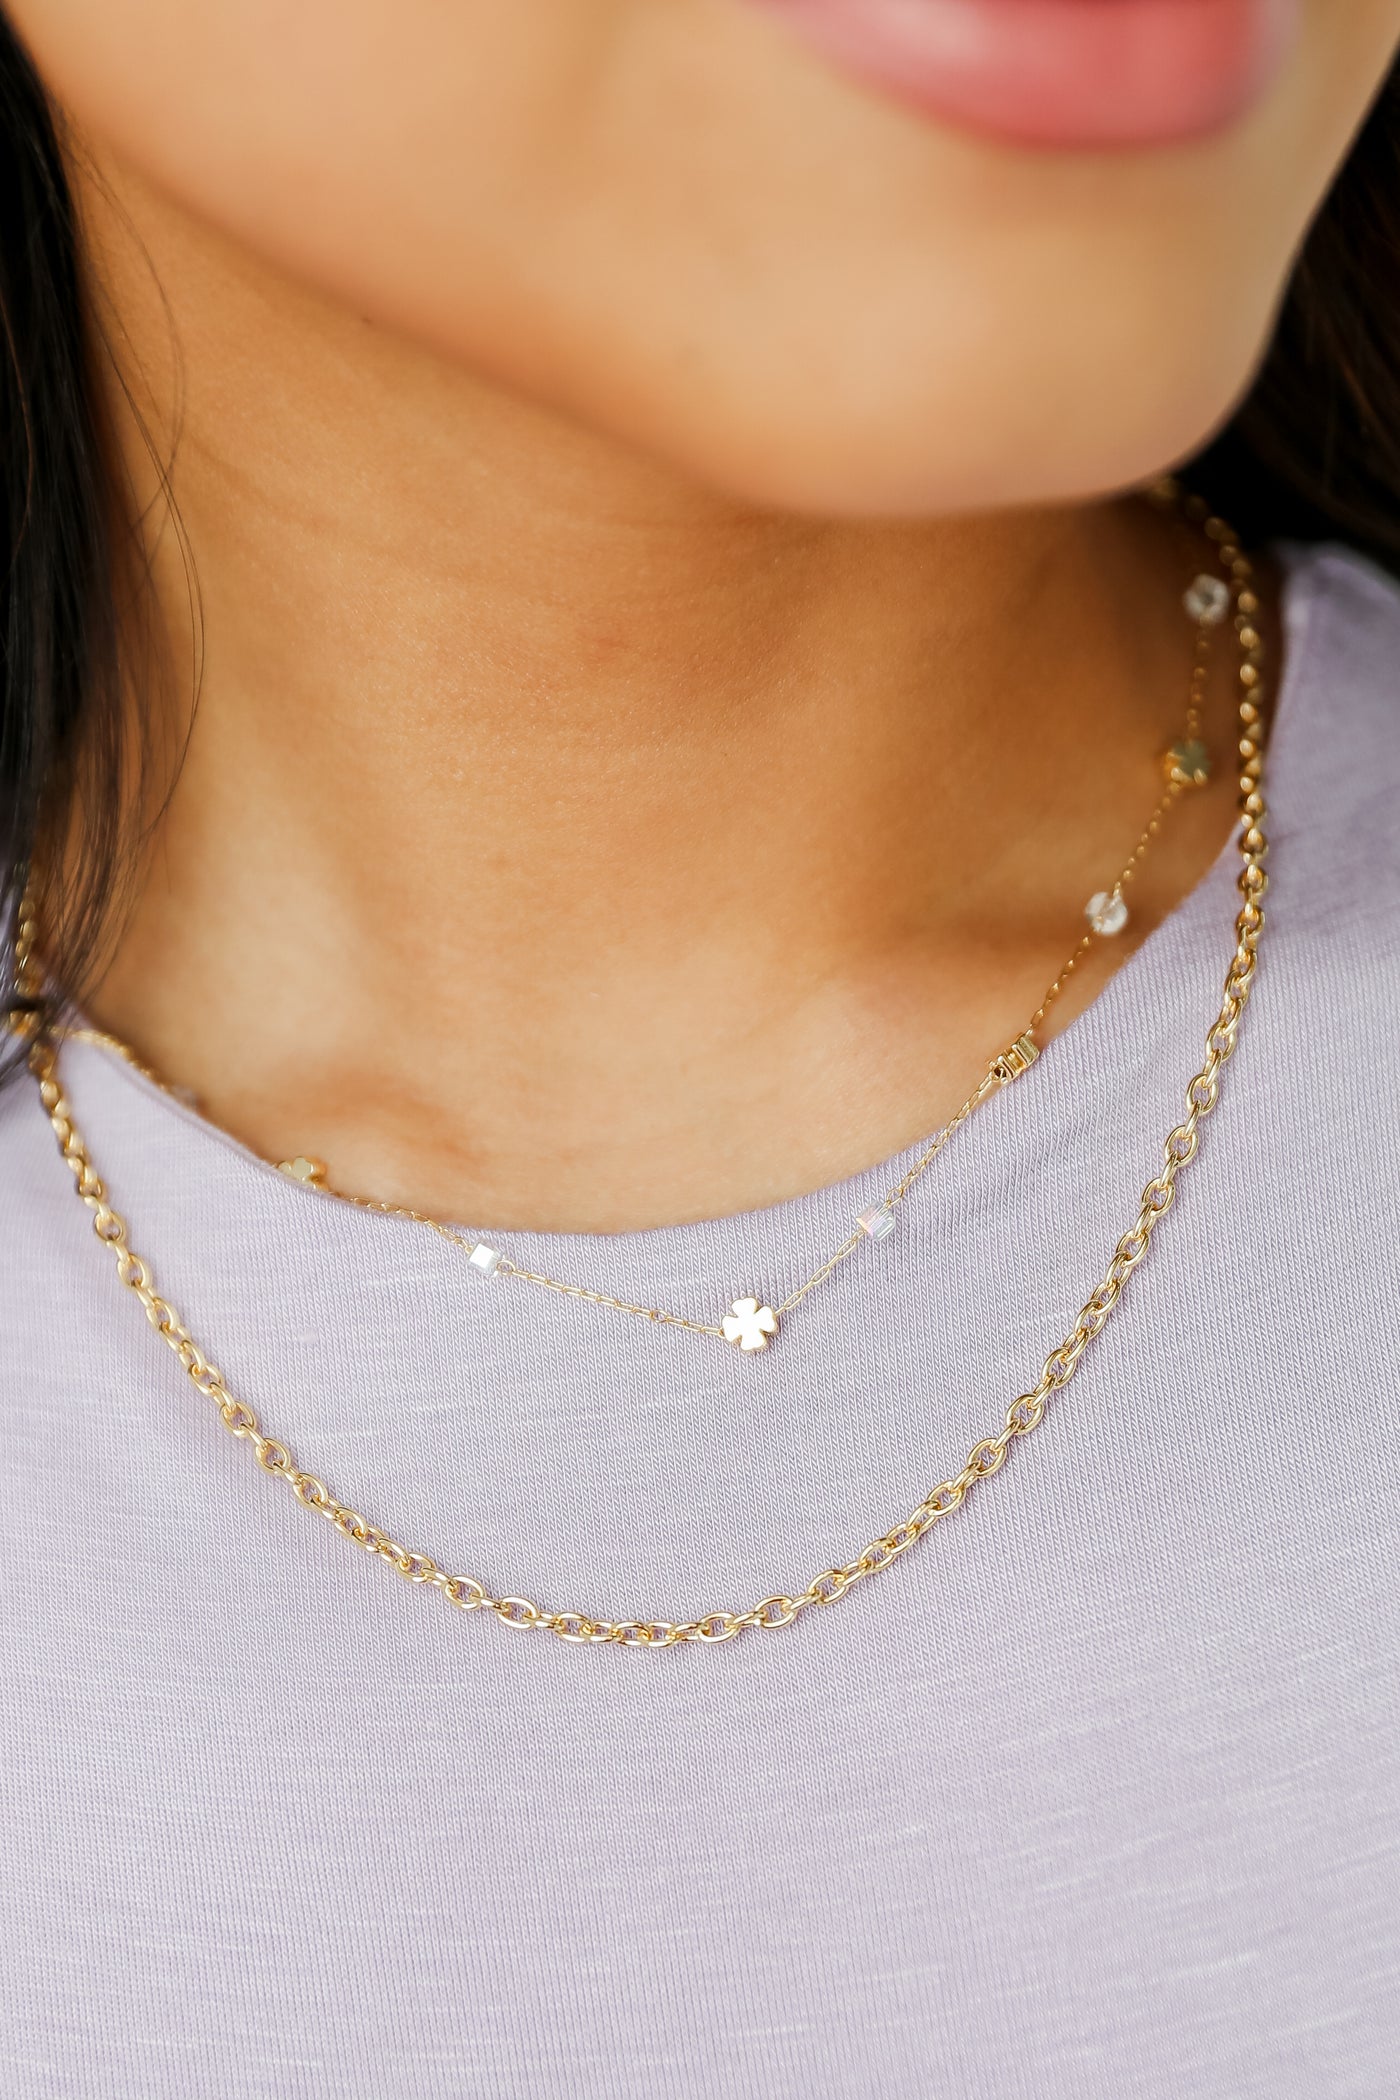 cute Gold Four Leaf Clover Layered Chain Necklace